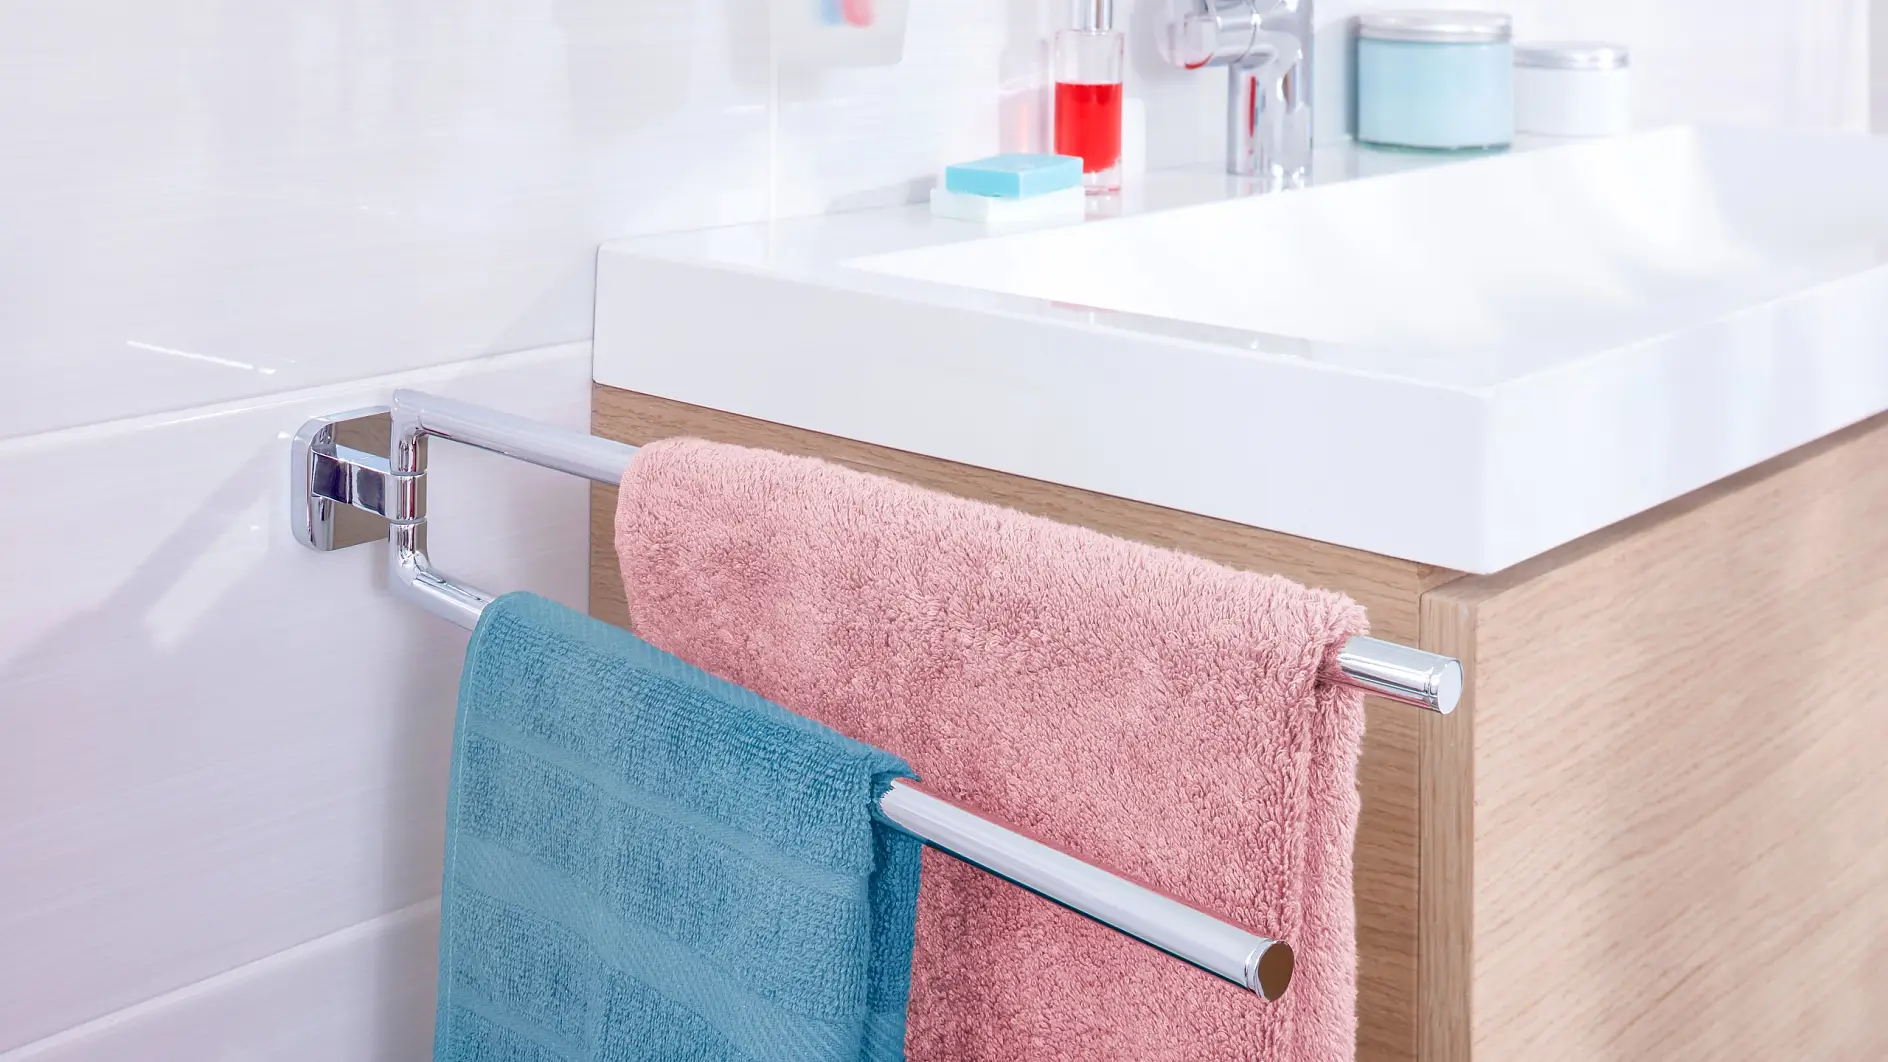 Keep your towels close to where you need them and give them space to dry after use.